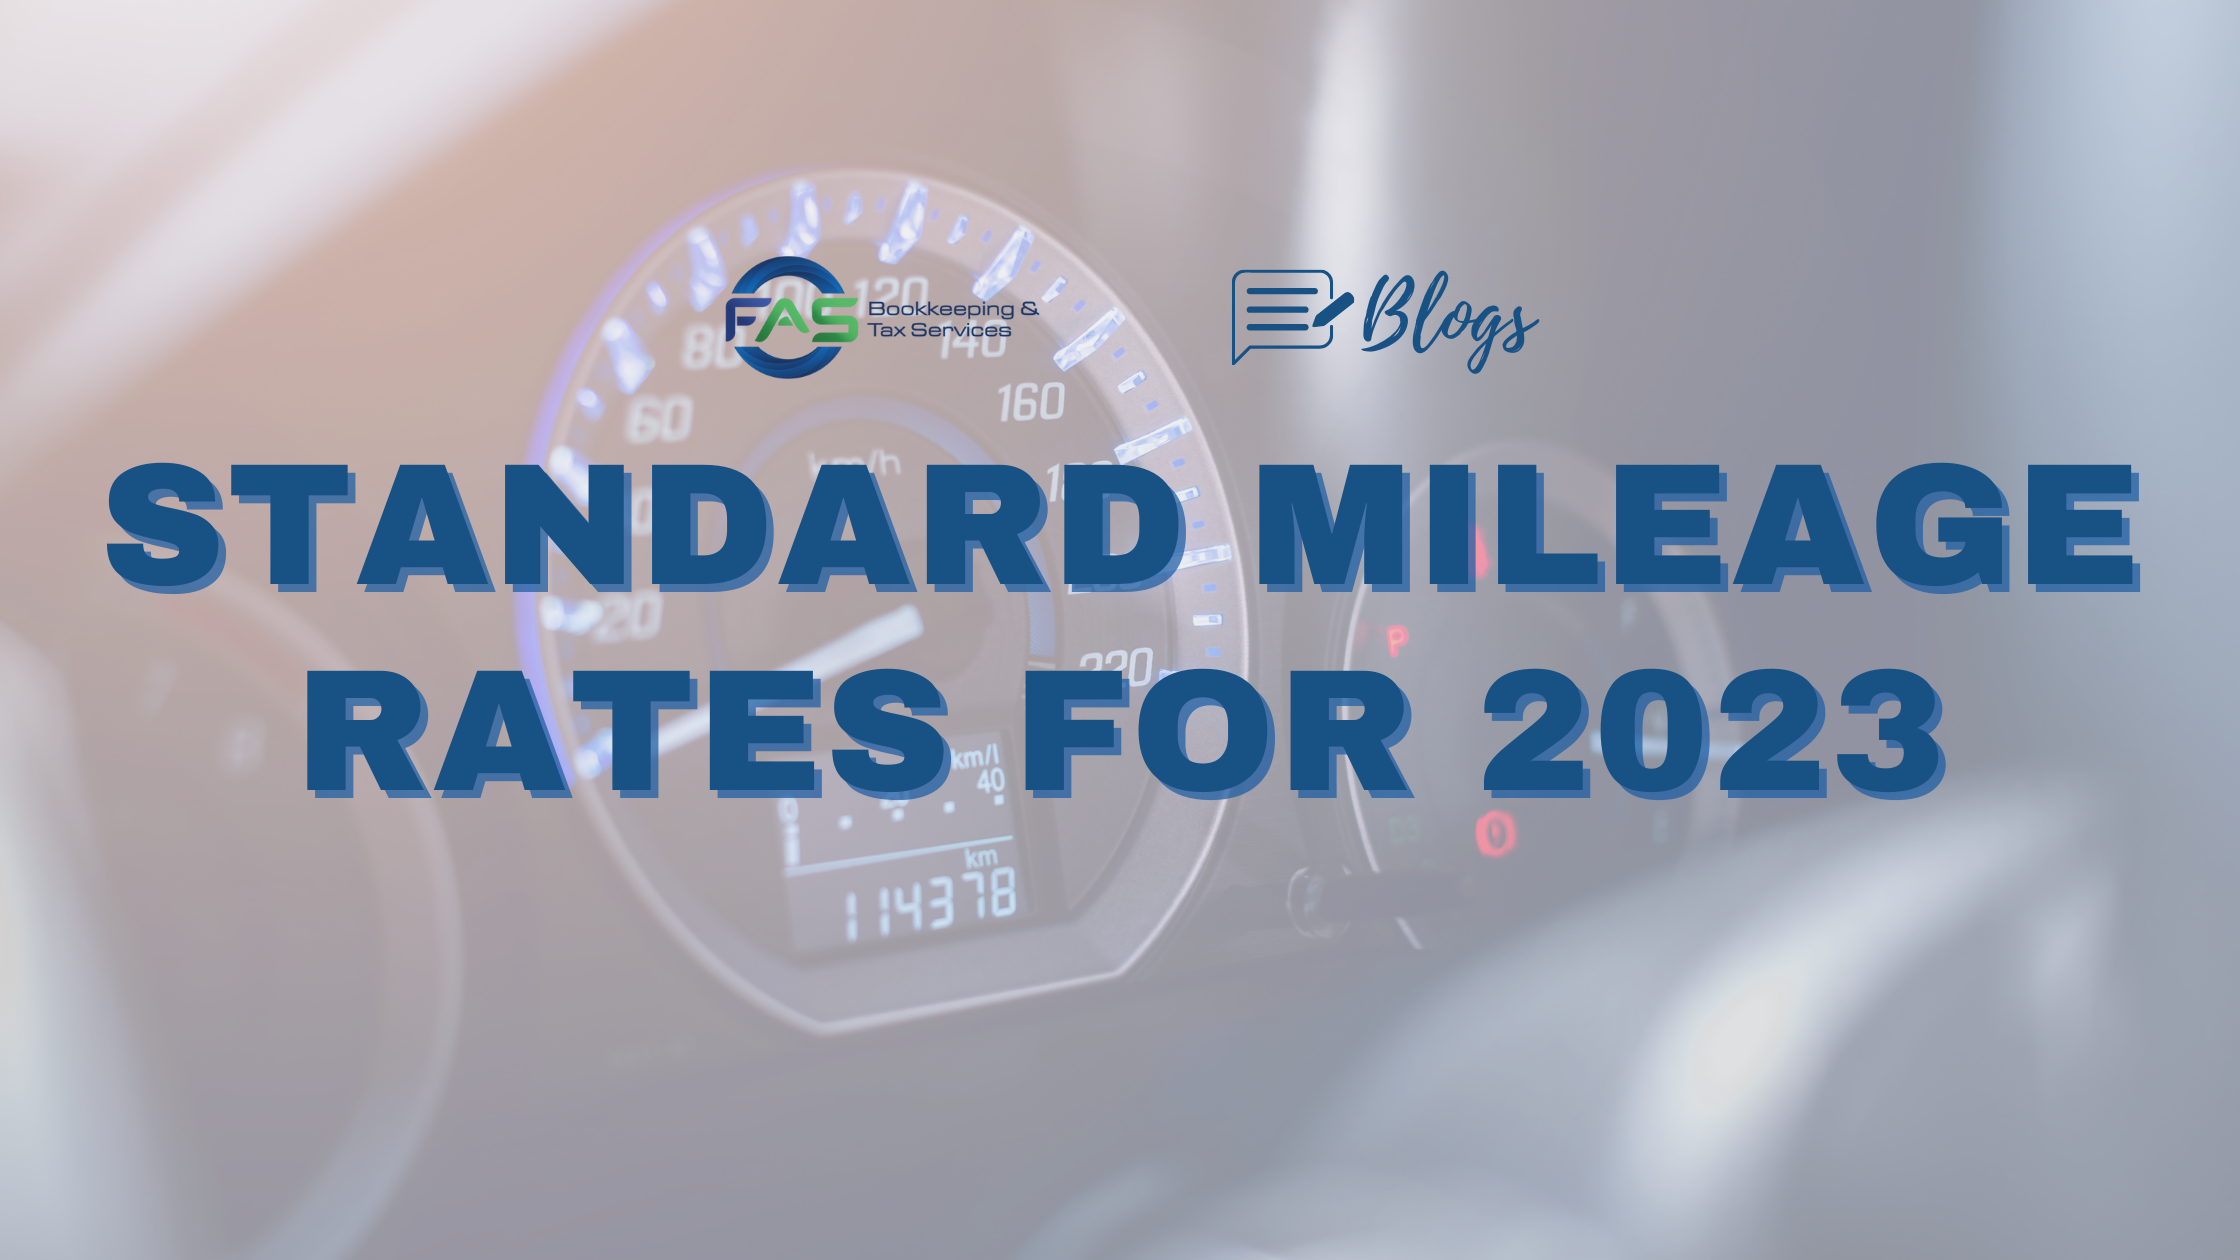 Standard Mileage Rates for 2023